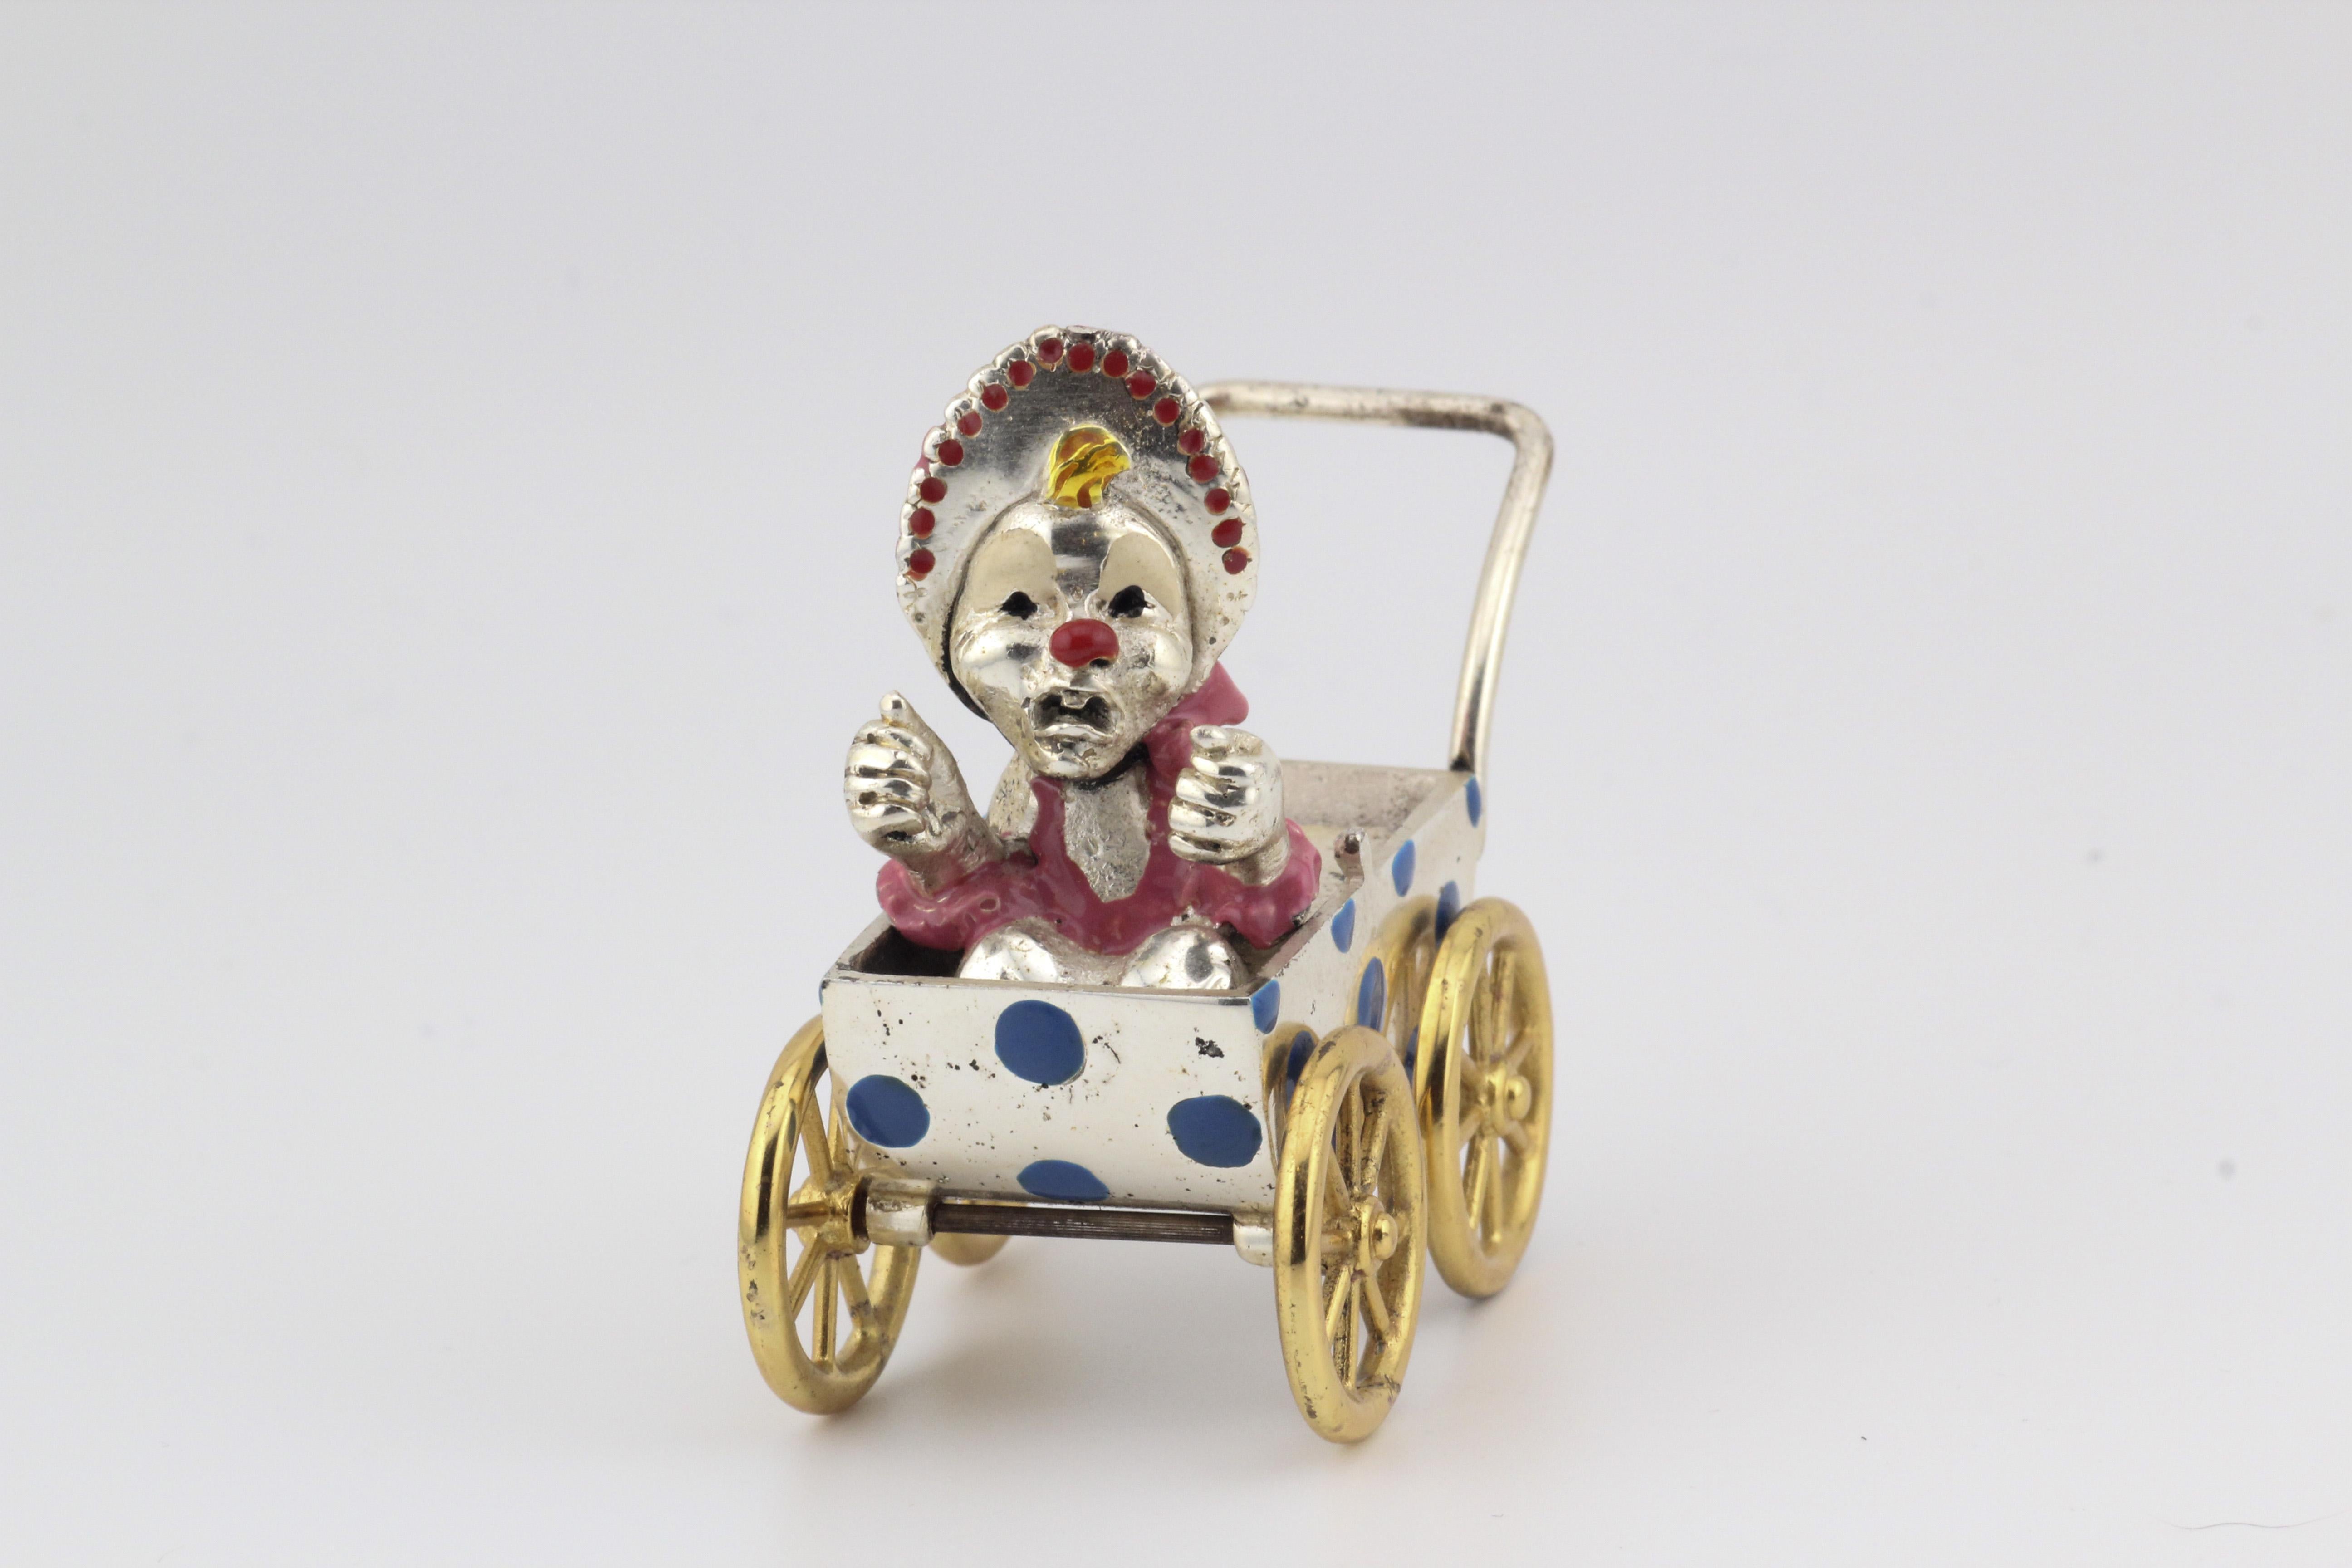 Tiffany & Co. Silver & Enamel Circus Clown Mother & Baby in Carriage Figurine 2